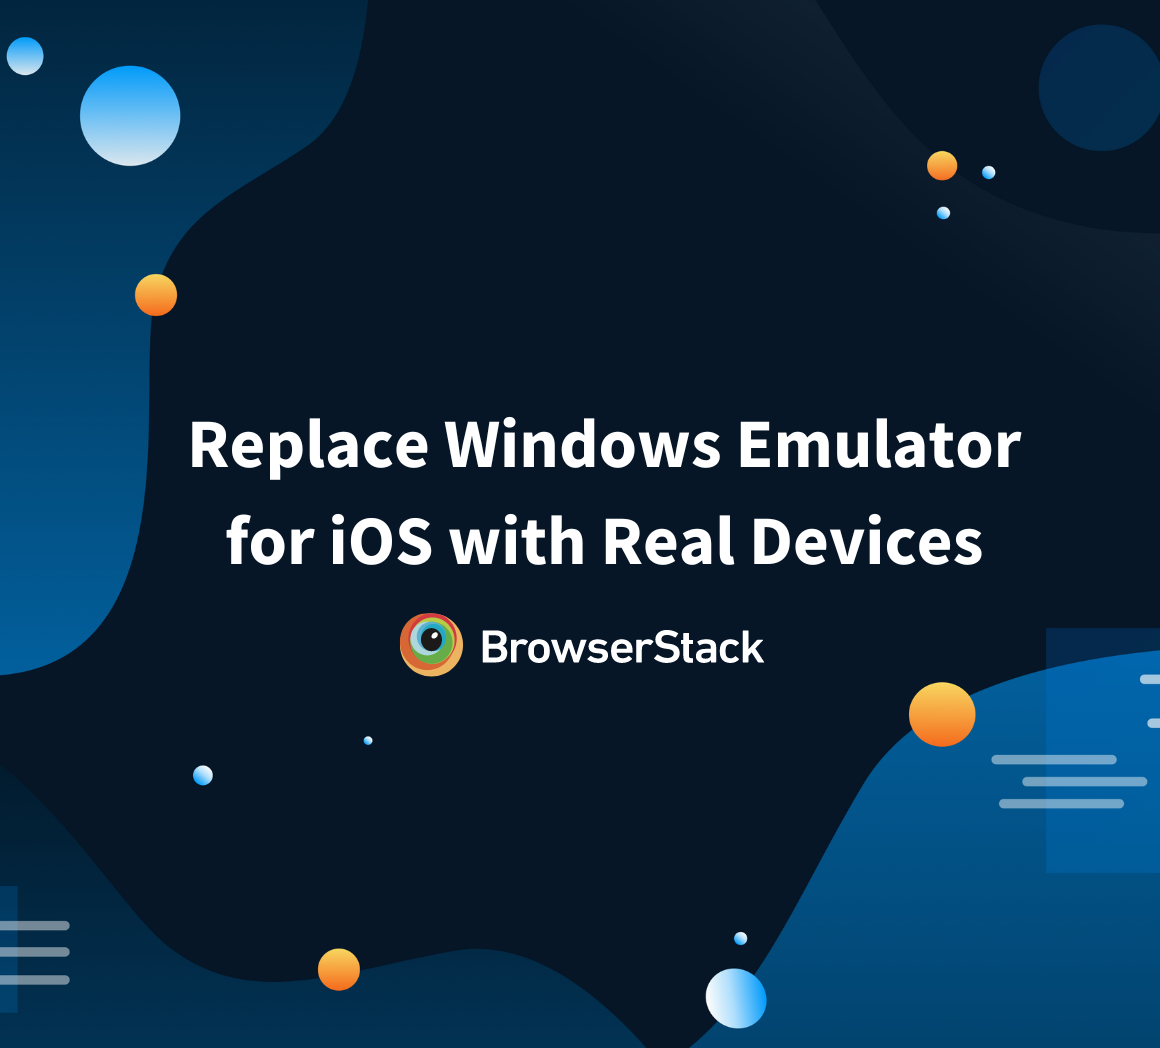 Replace Windows Emulator for iOS with Real Devices